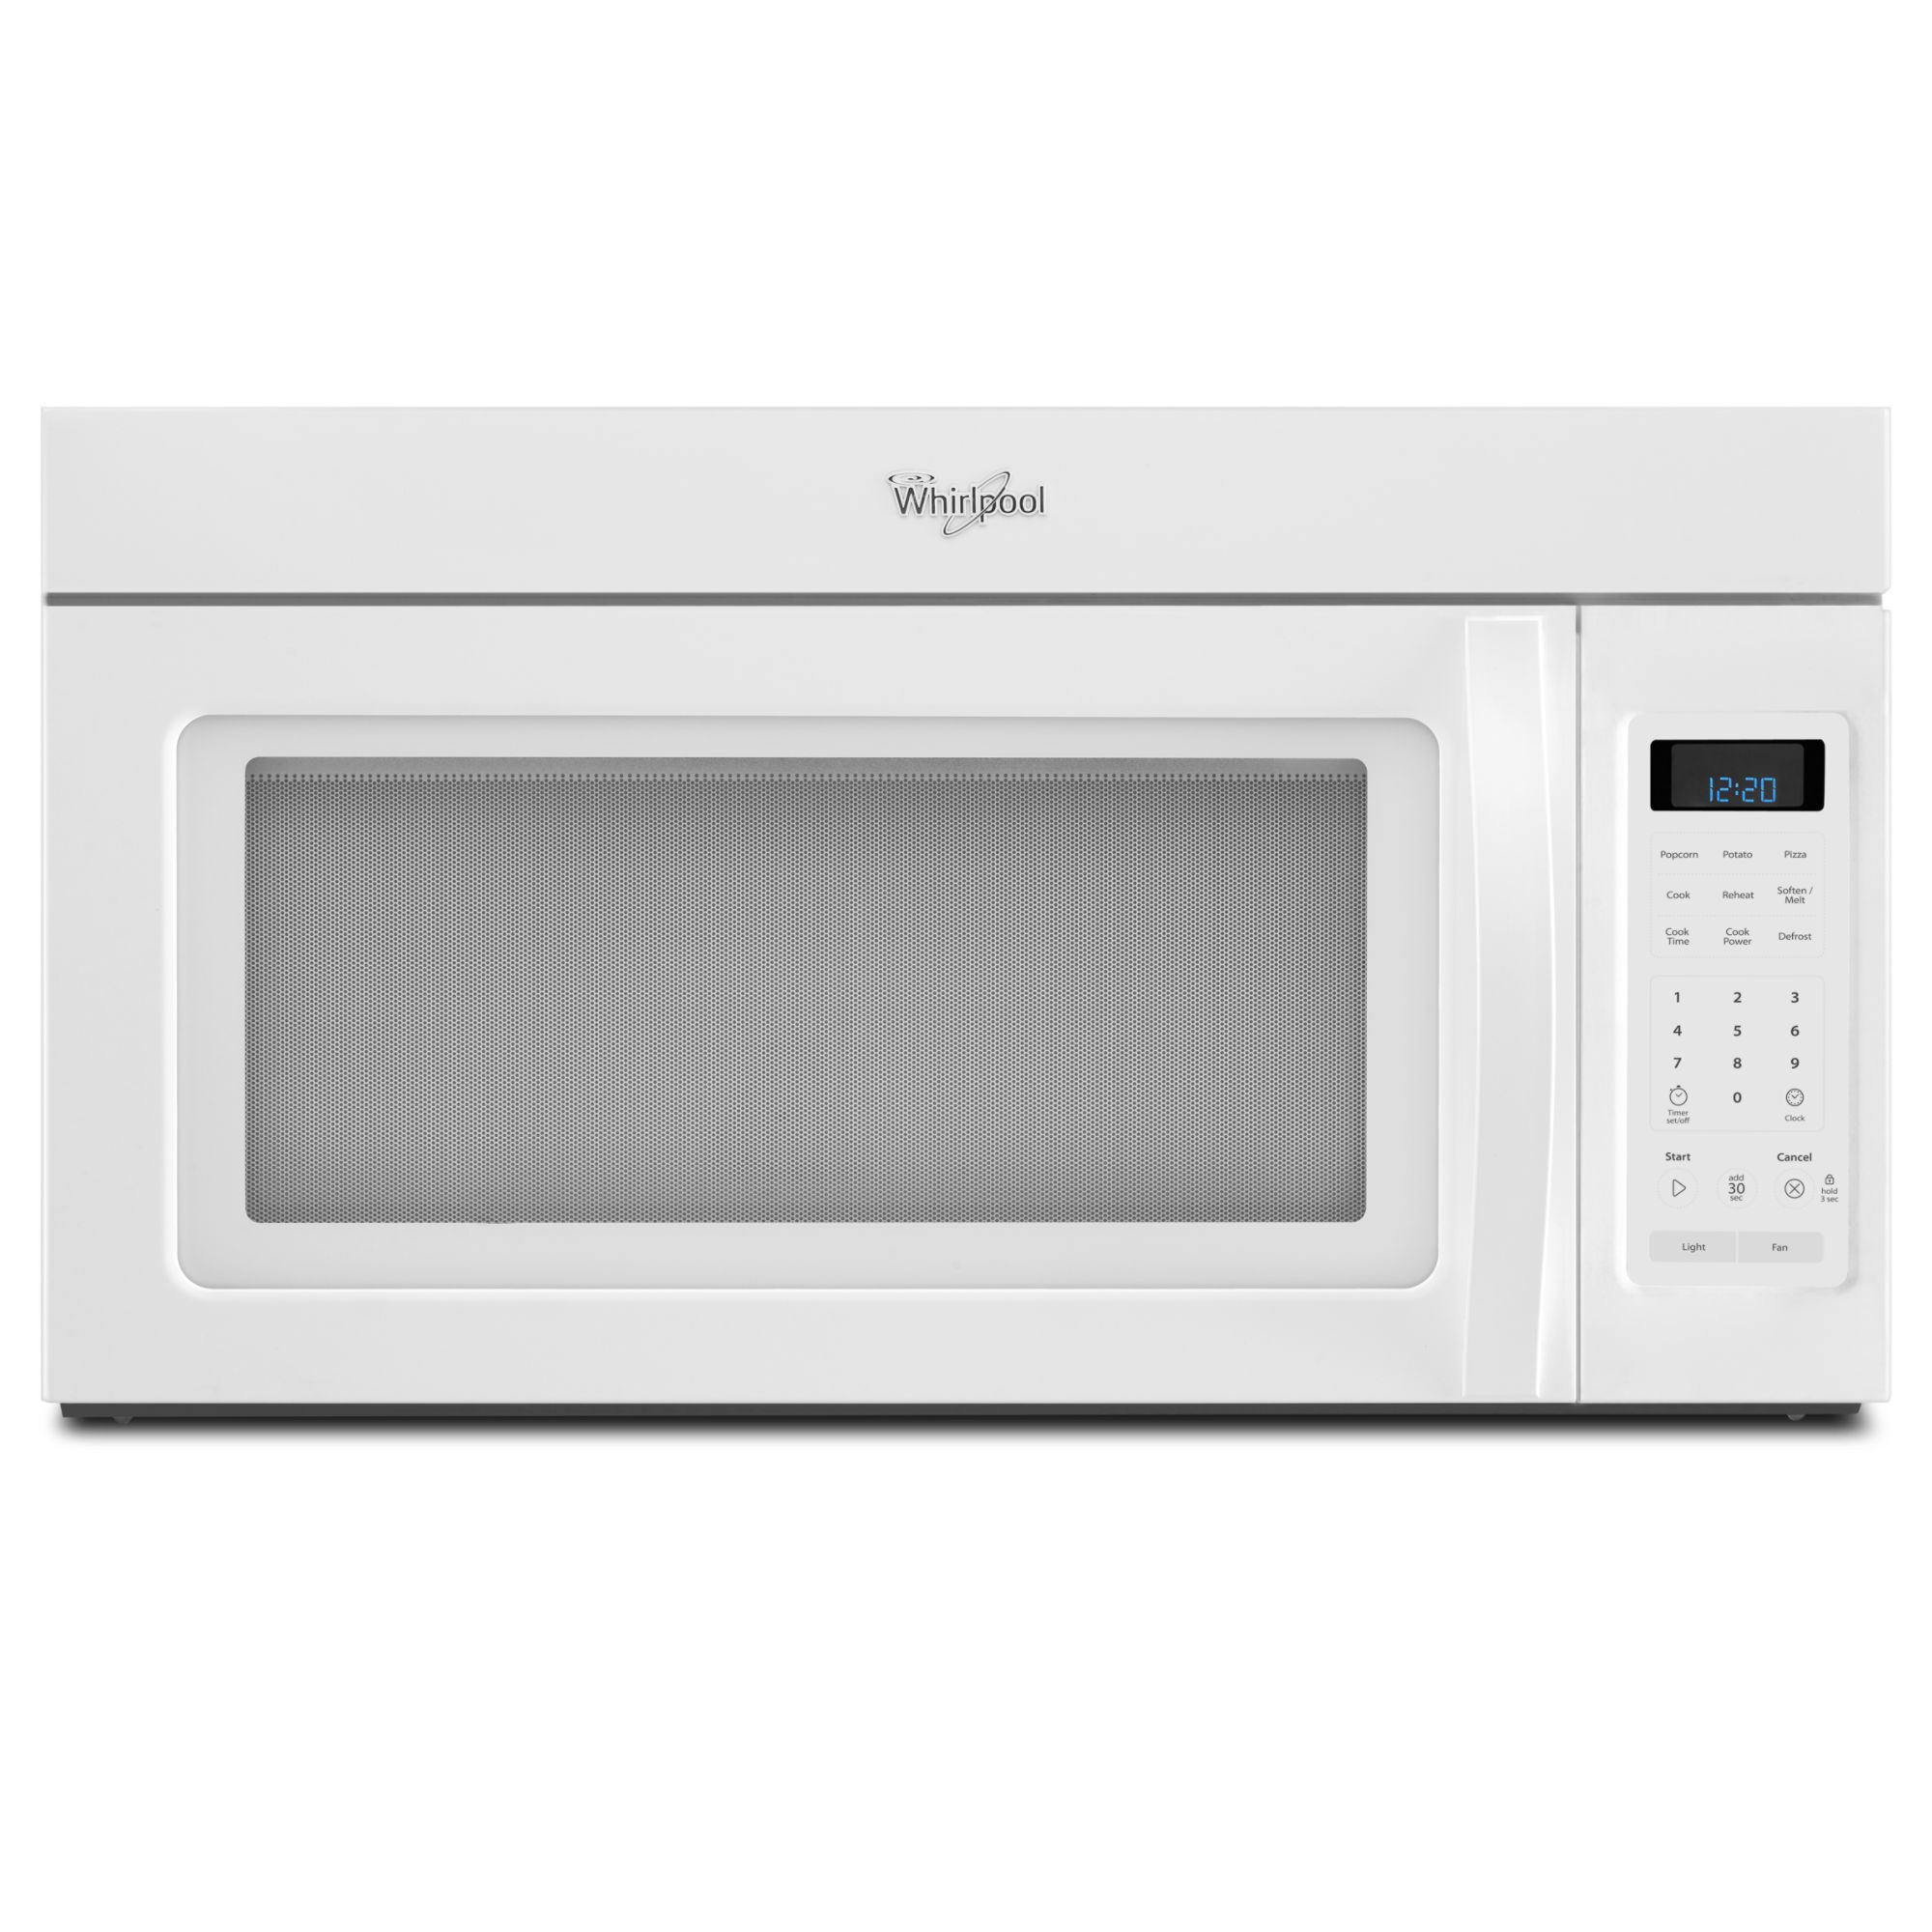 Whirlpool WMH31017AW White 30 in. Over the Range Microwave w/ 2Speed Fan Sears Outlet